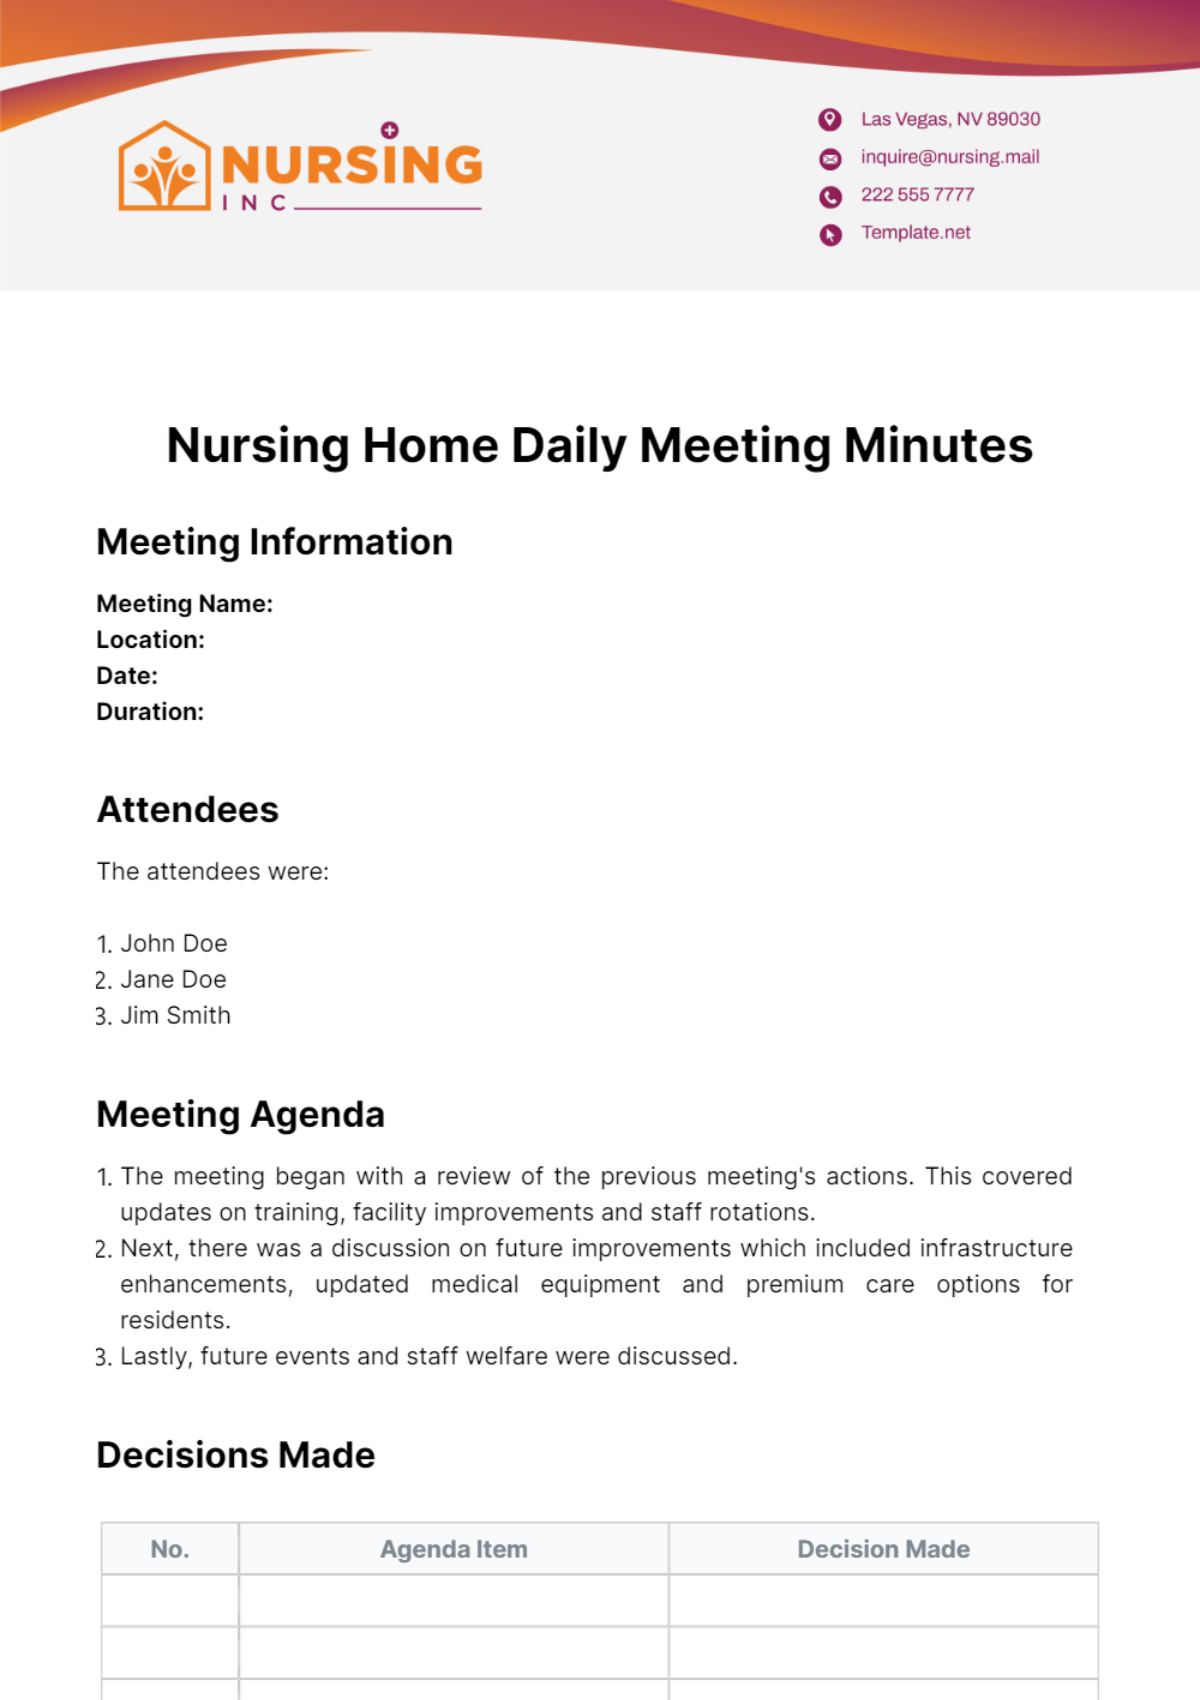 Nursing Home Daily Meeting Minutes Template